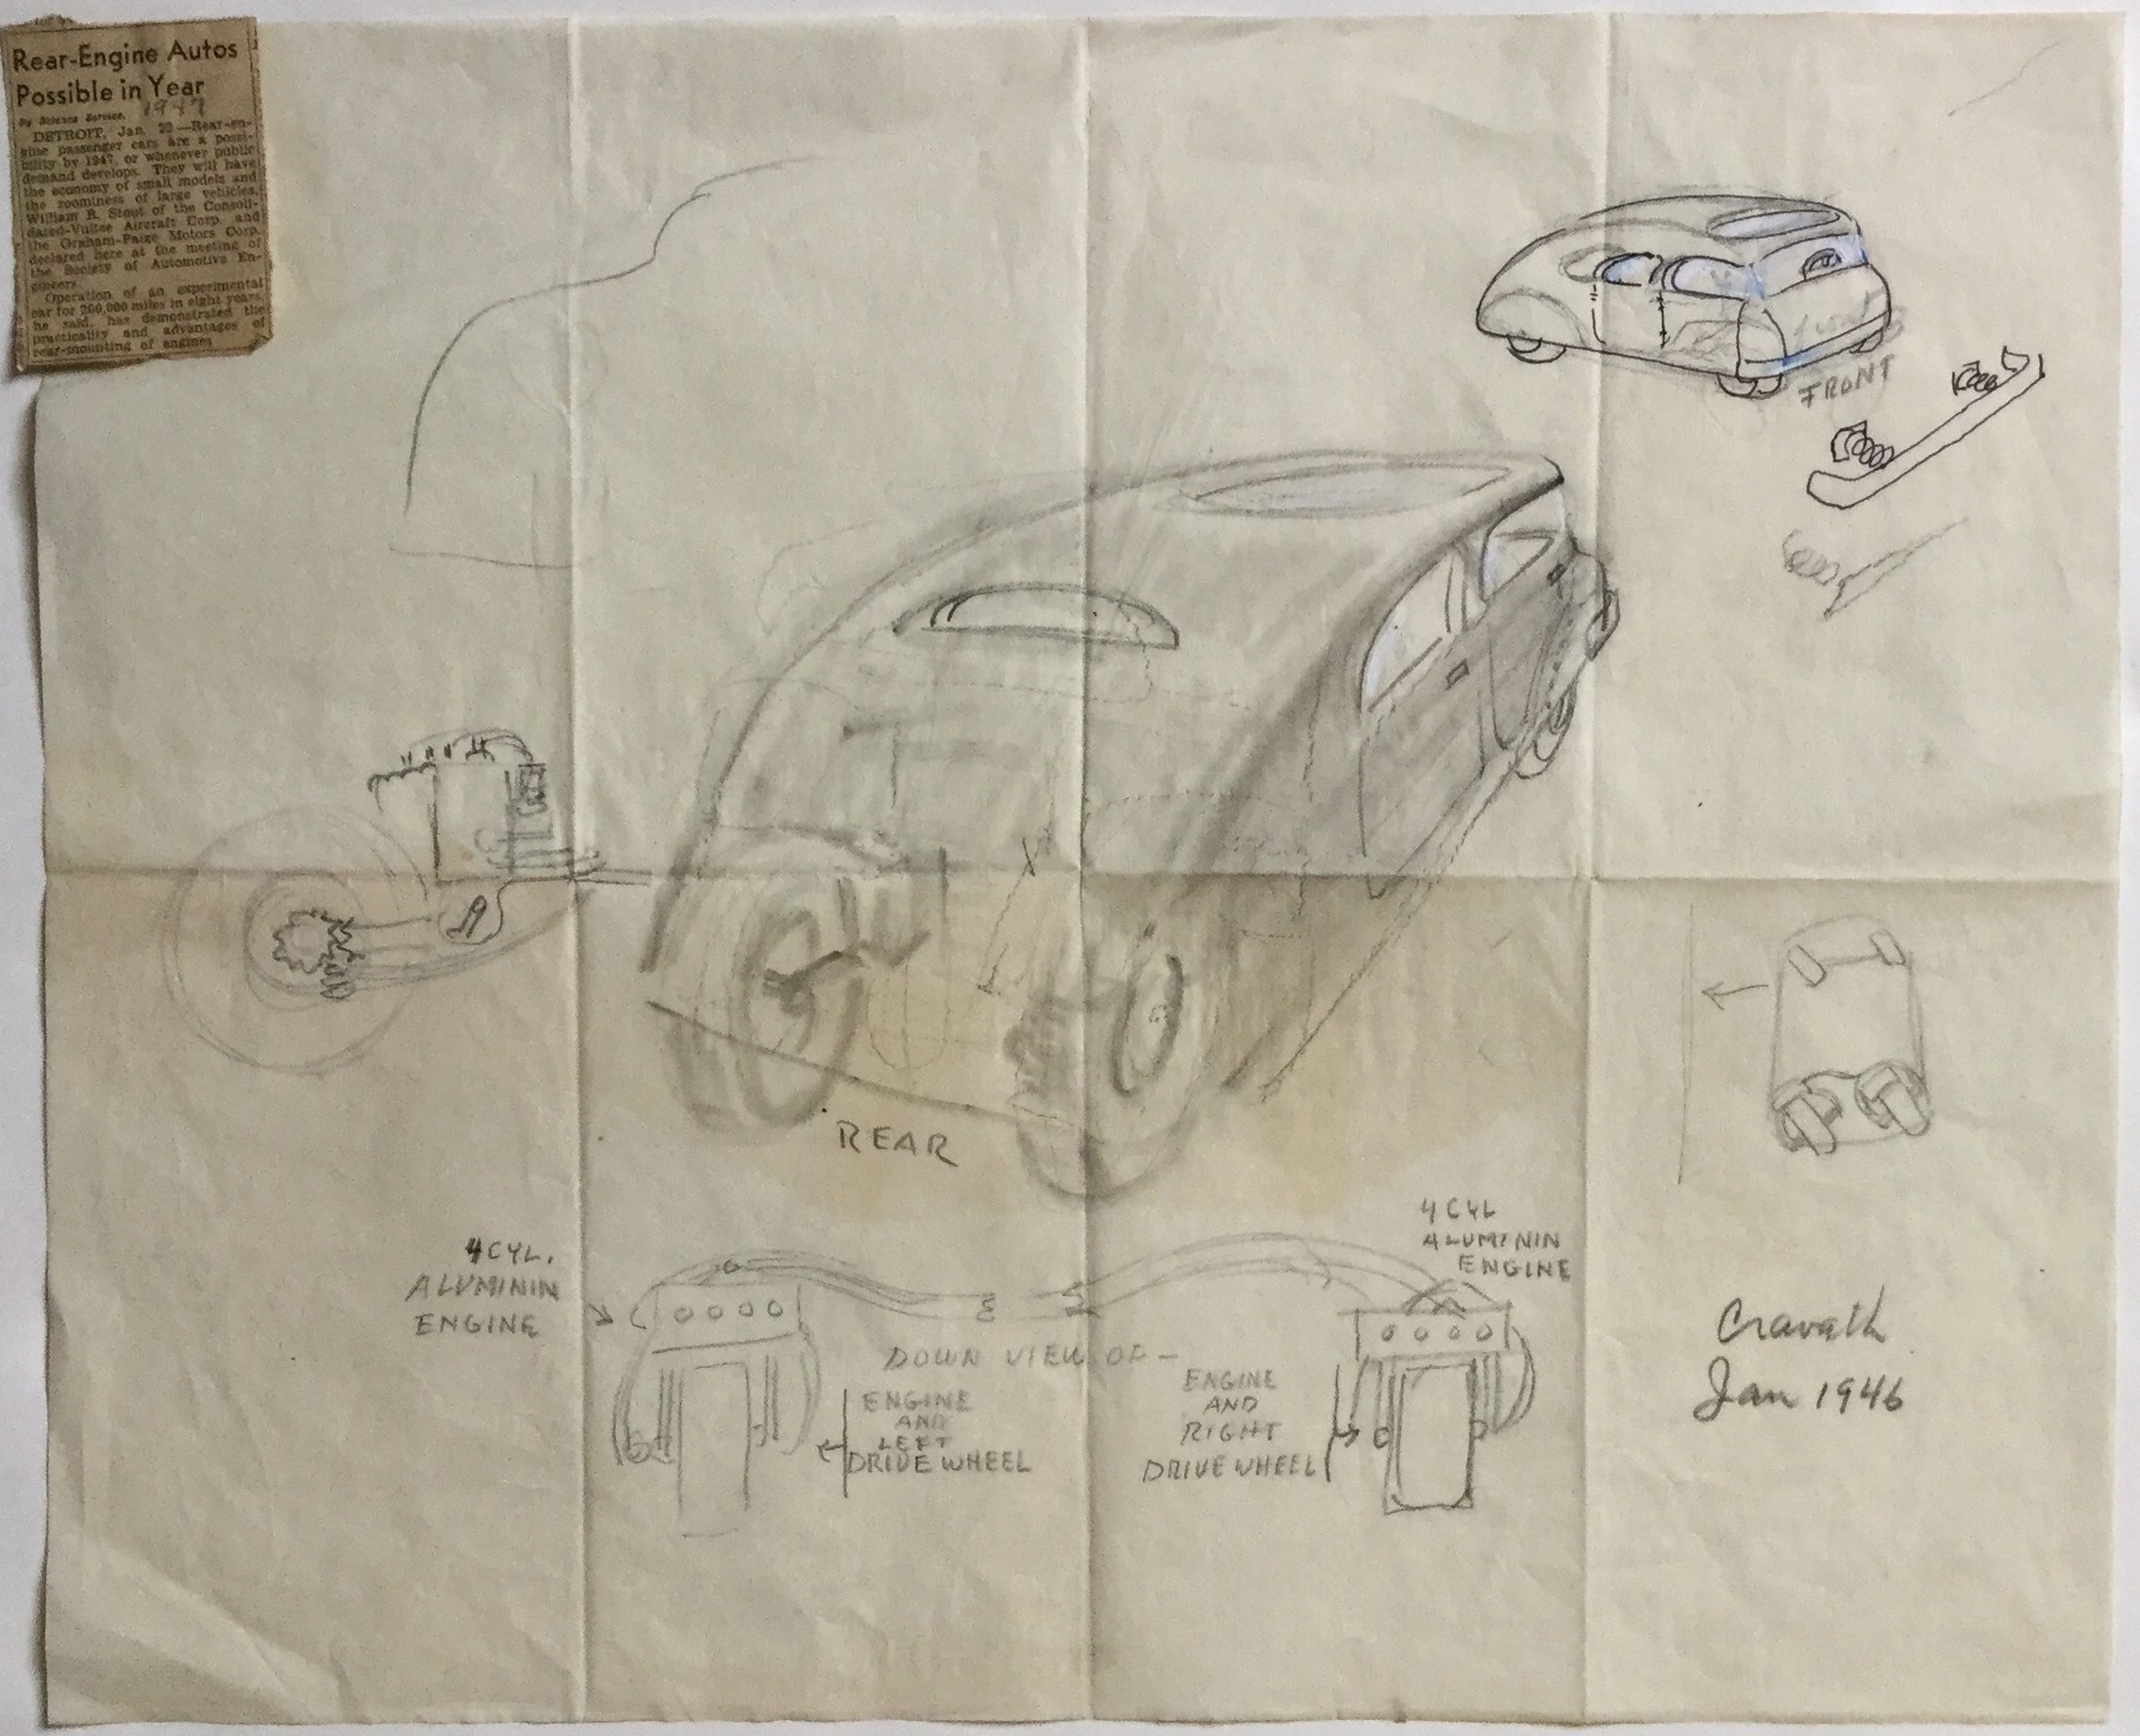 J501	INNOVATIVE SKETCH FOR A REAR-ENGINED AUTOMOBILE, 1942